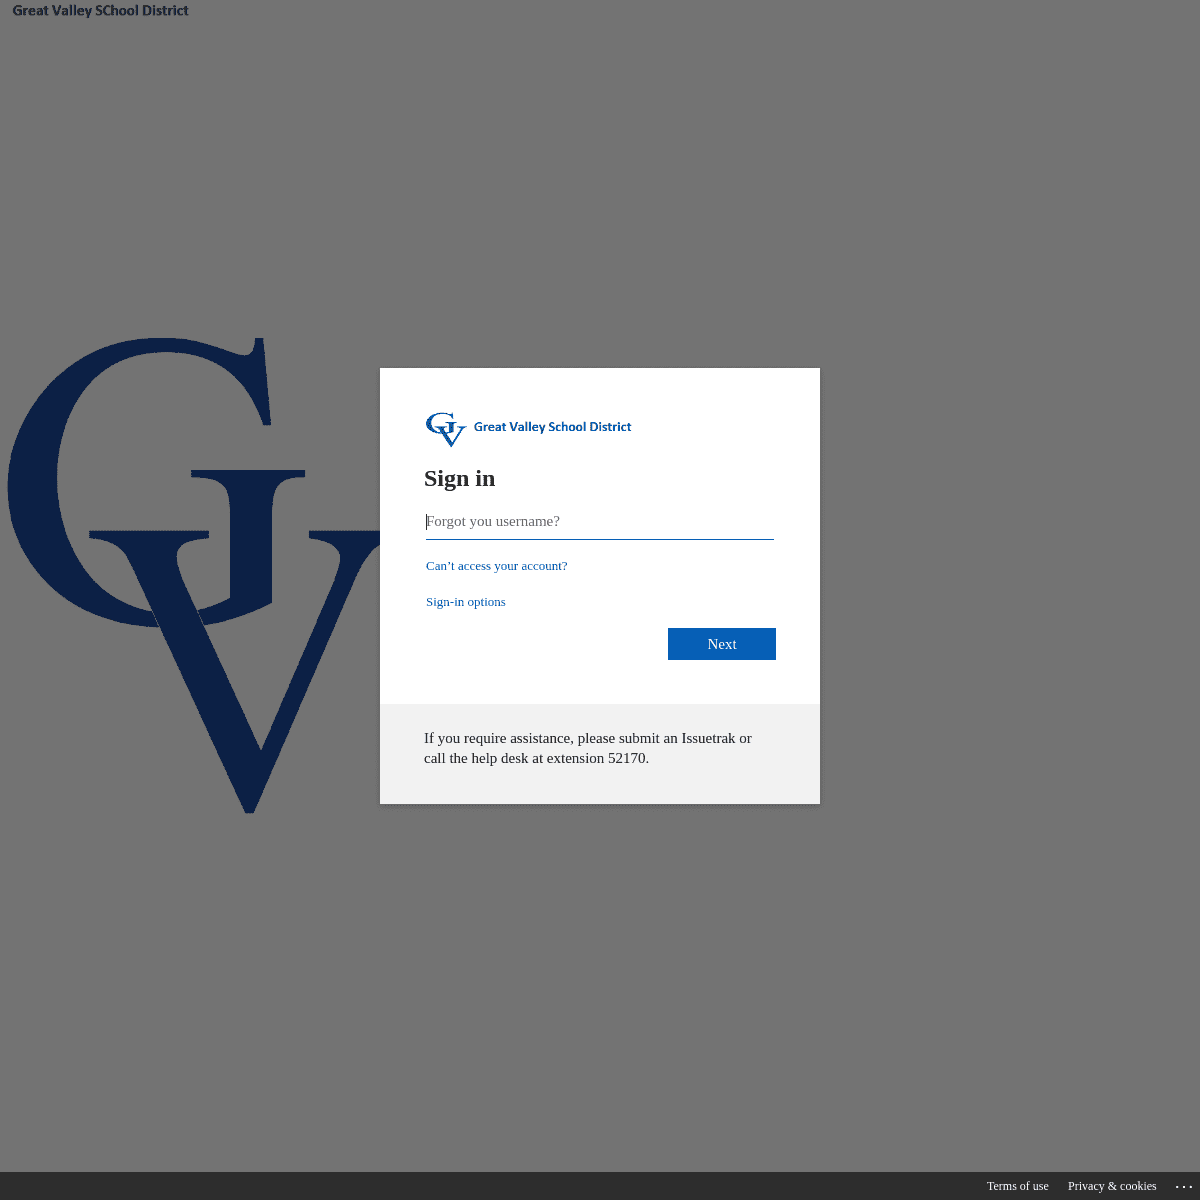 A complete backup of gv1-my.sharepoint.com